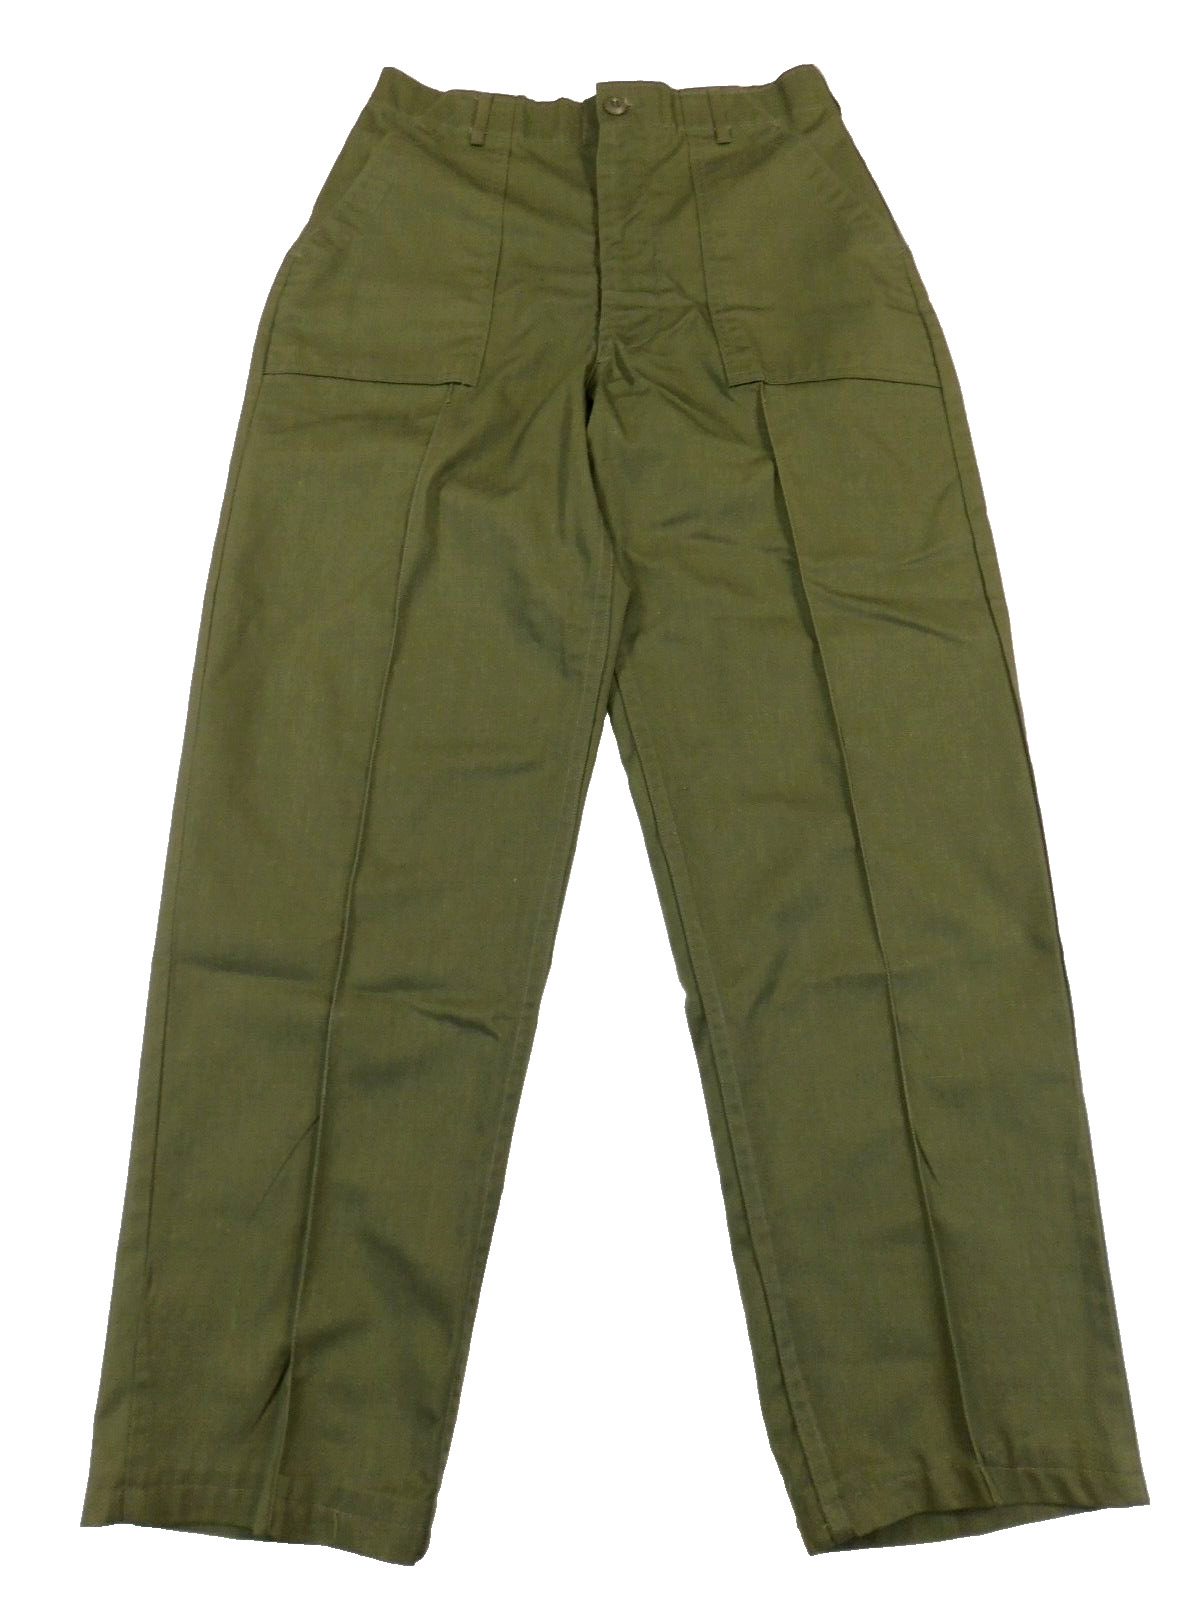 US Military Utility Pants OG-507 32 x 29 Green Fatigue Durable Vintage Trousers